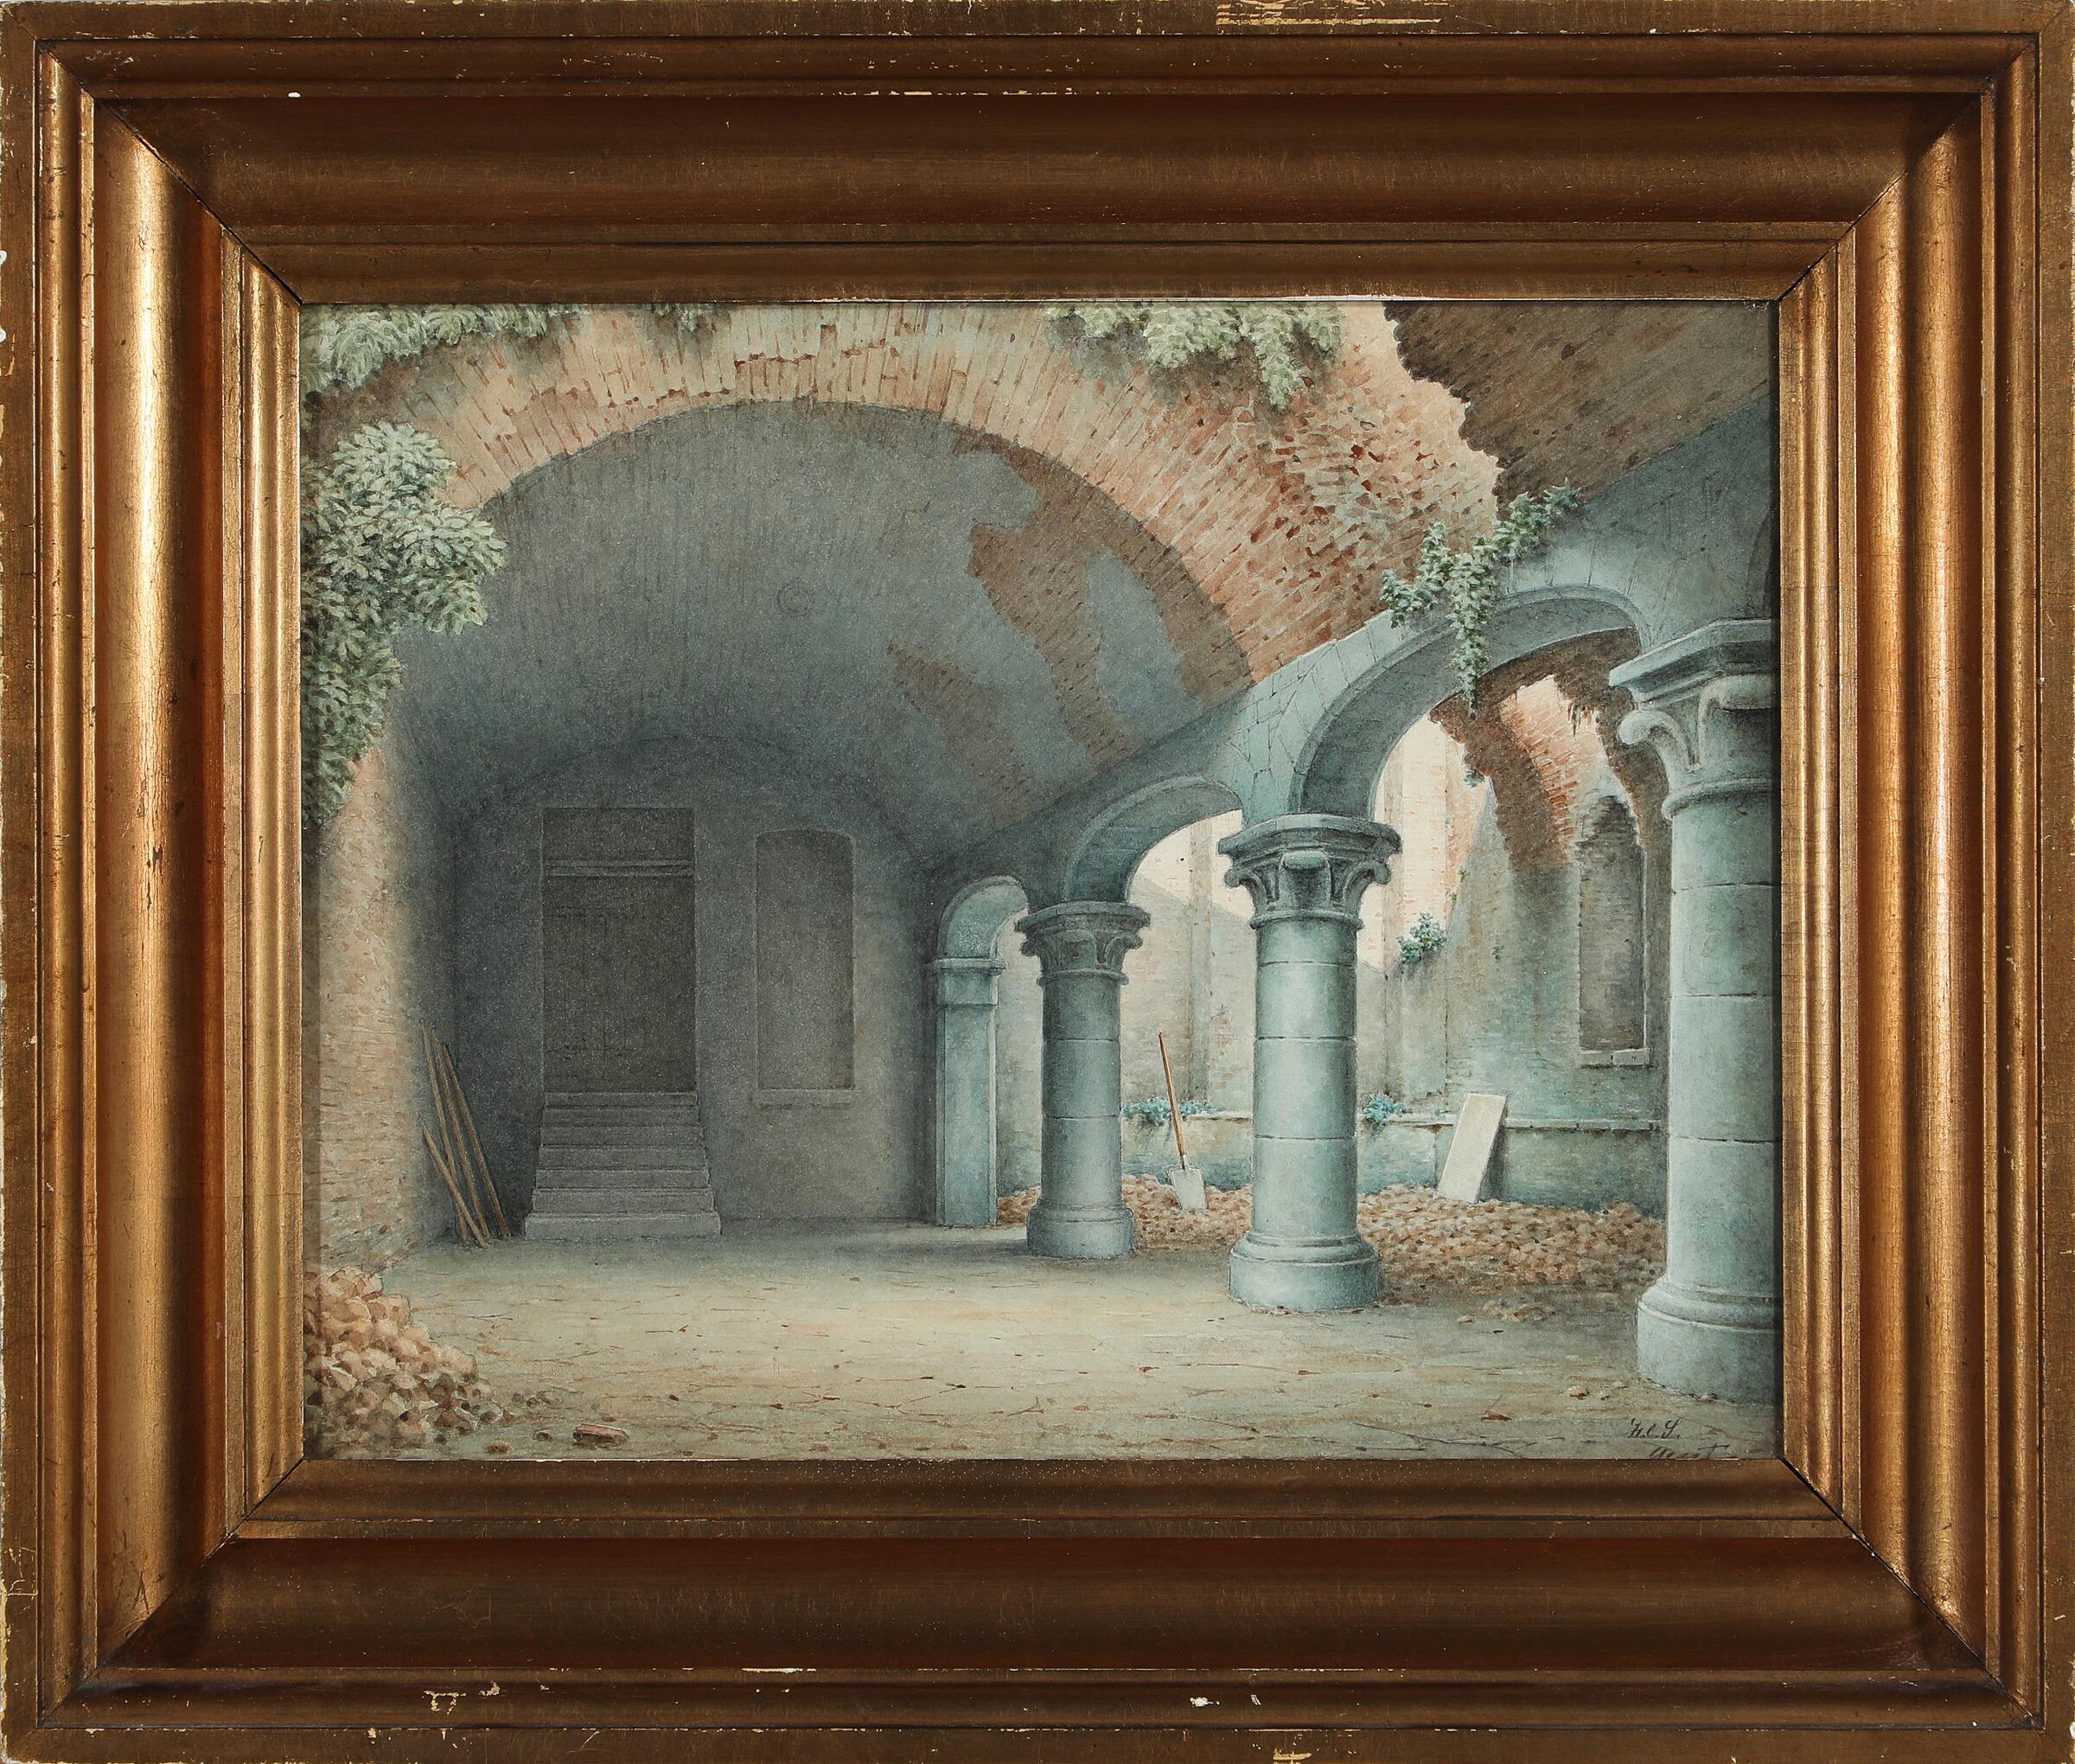 Painted Ruins of a Monastery Courtyard, Signed and Dated by Harald Conrad Stilling, 1865